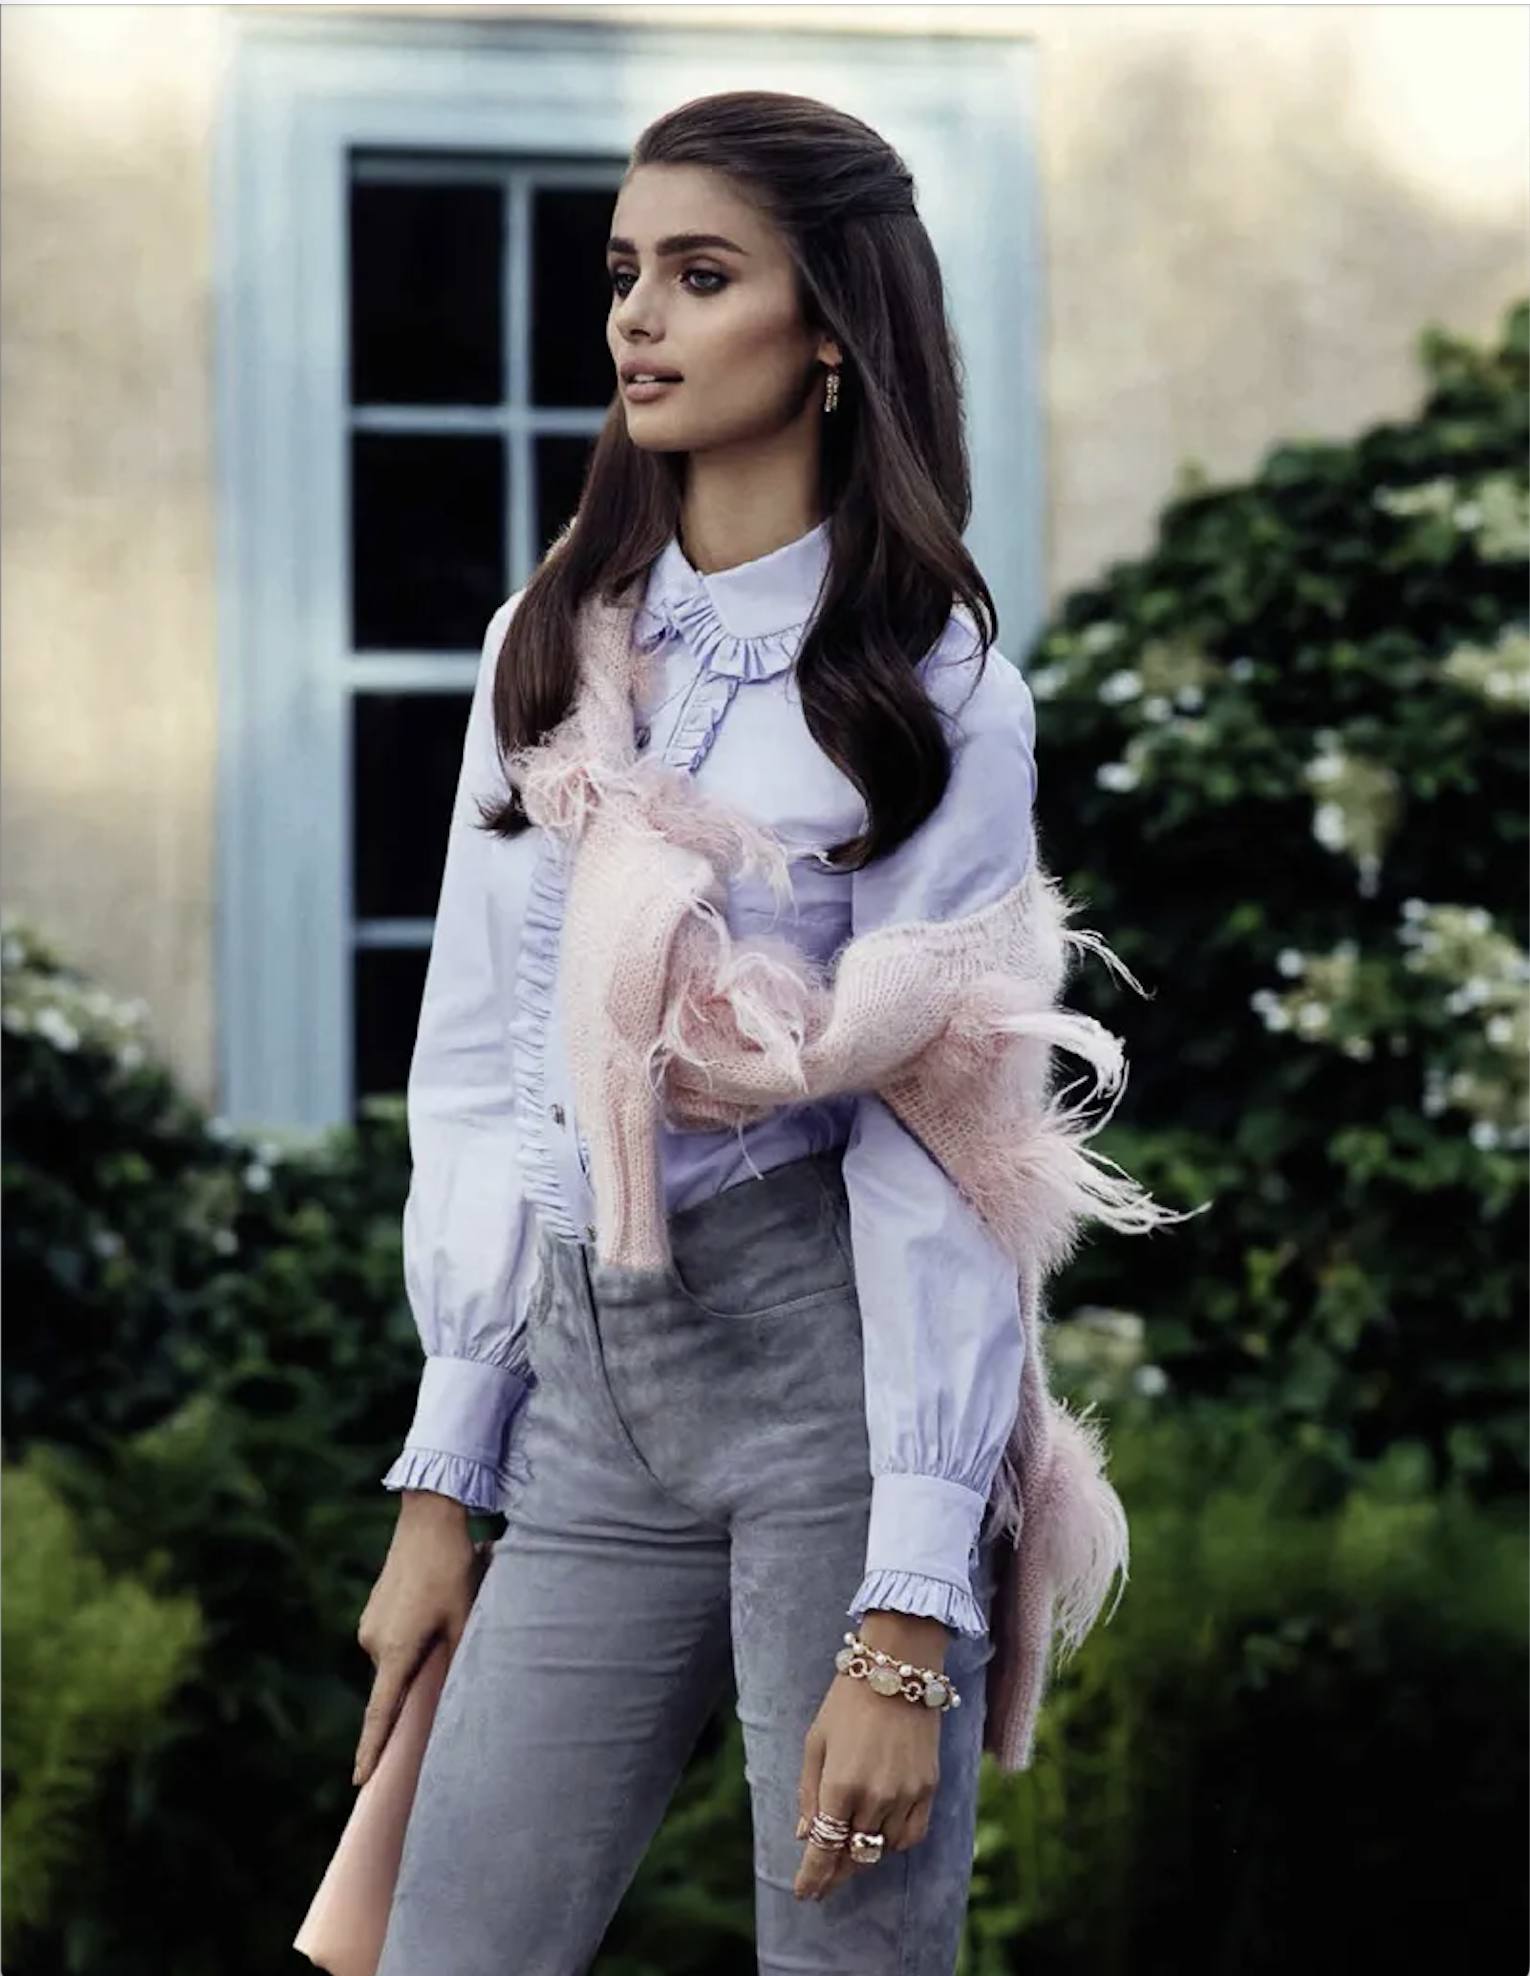 Taylor-Hill-by-Miguel-Reviergo-Vogue-Spain-5.png